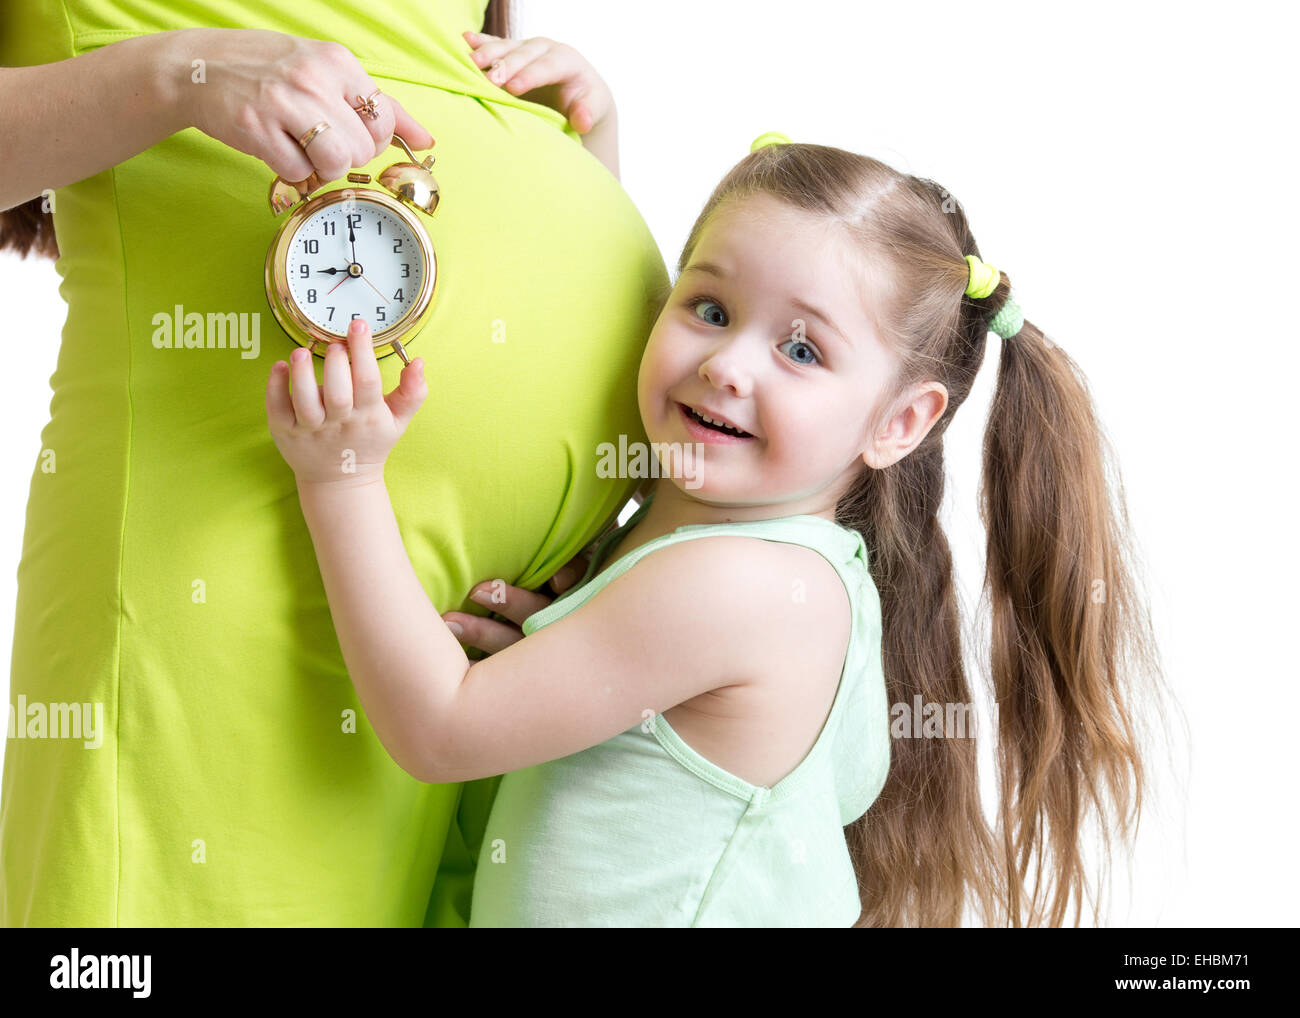 child looks at alarm clock and pregnant woman belly Stock Photo